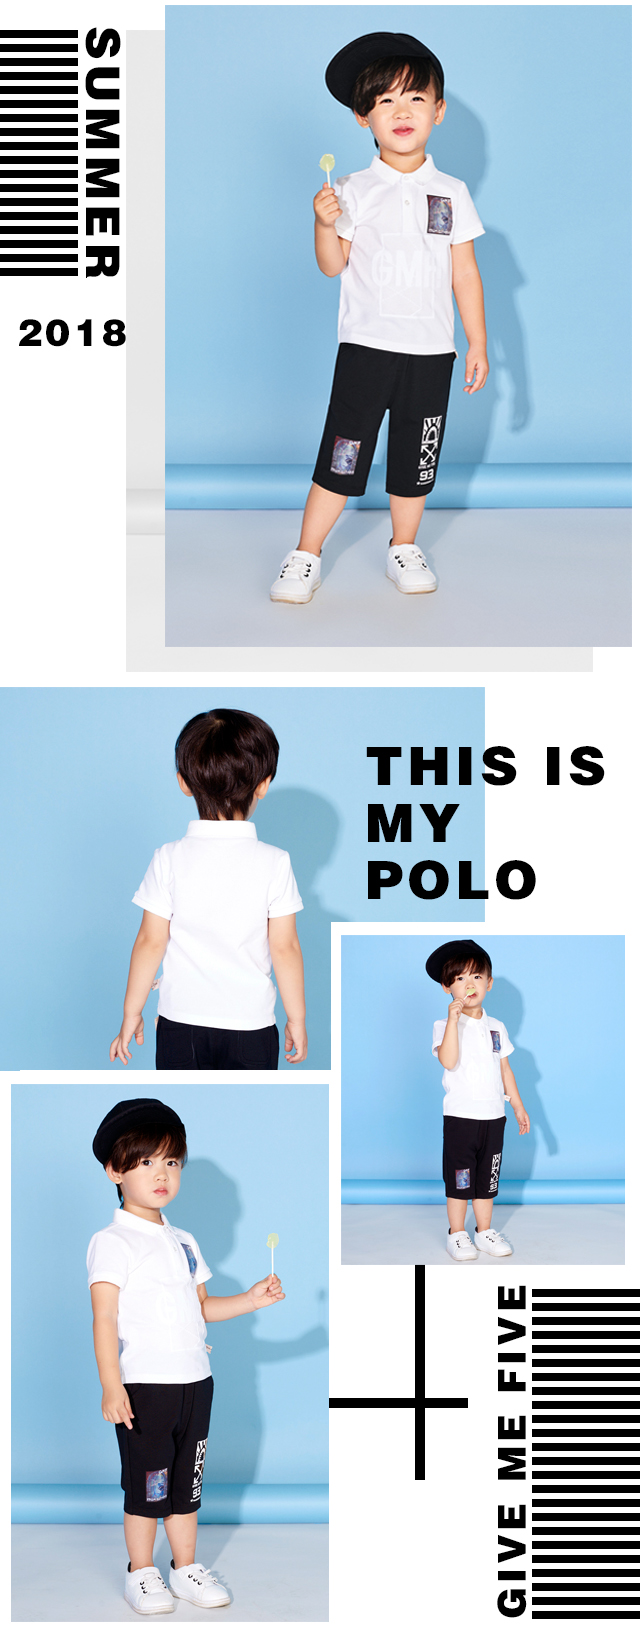 Give me five children's clothing: how to live up to the feelings of a Polo shirt